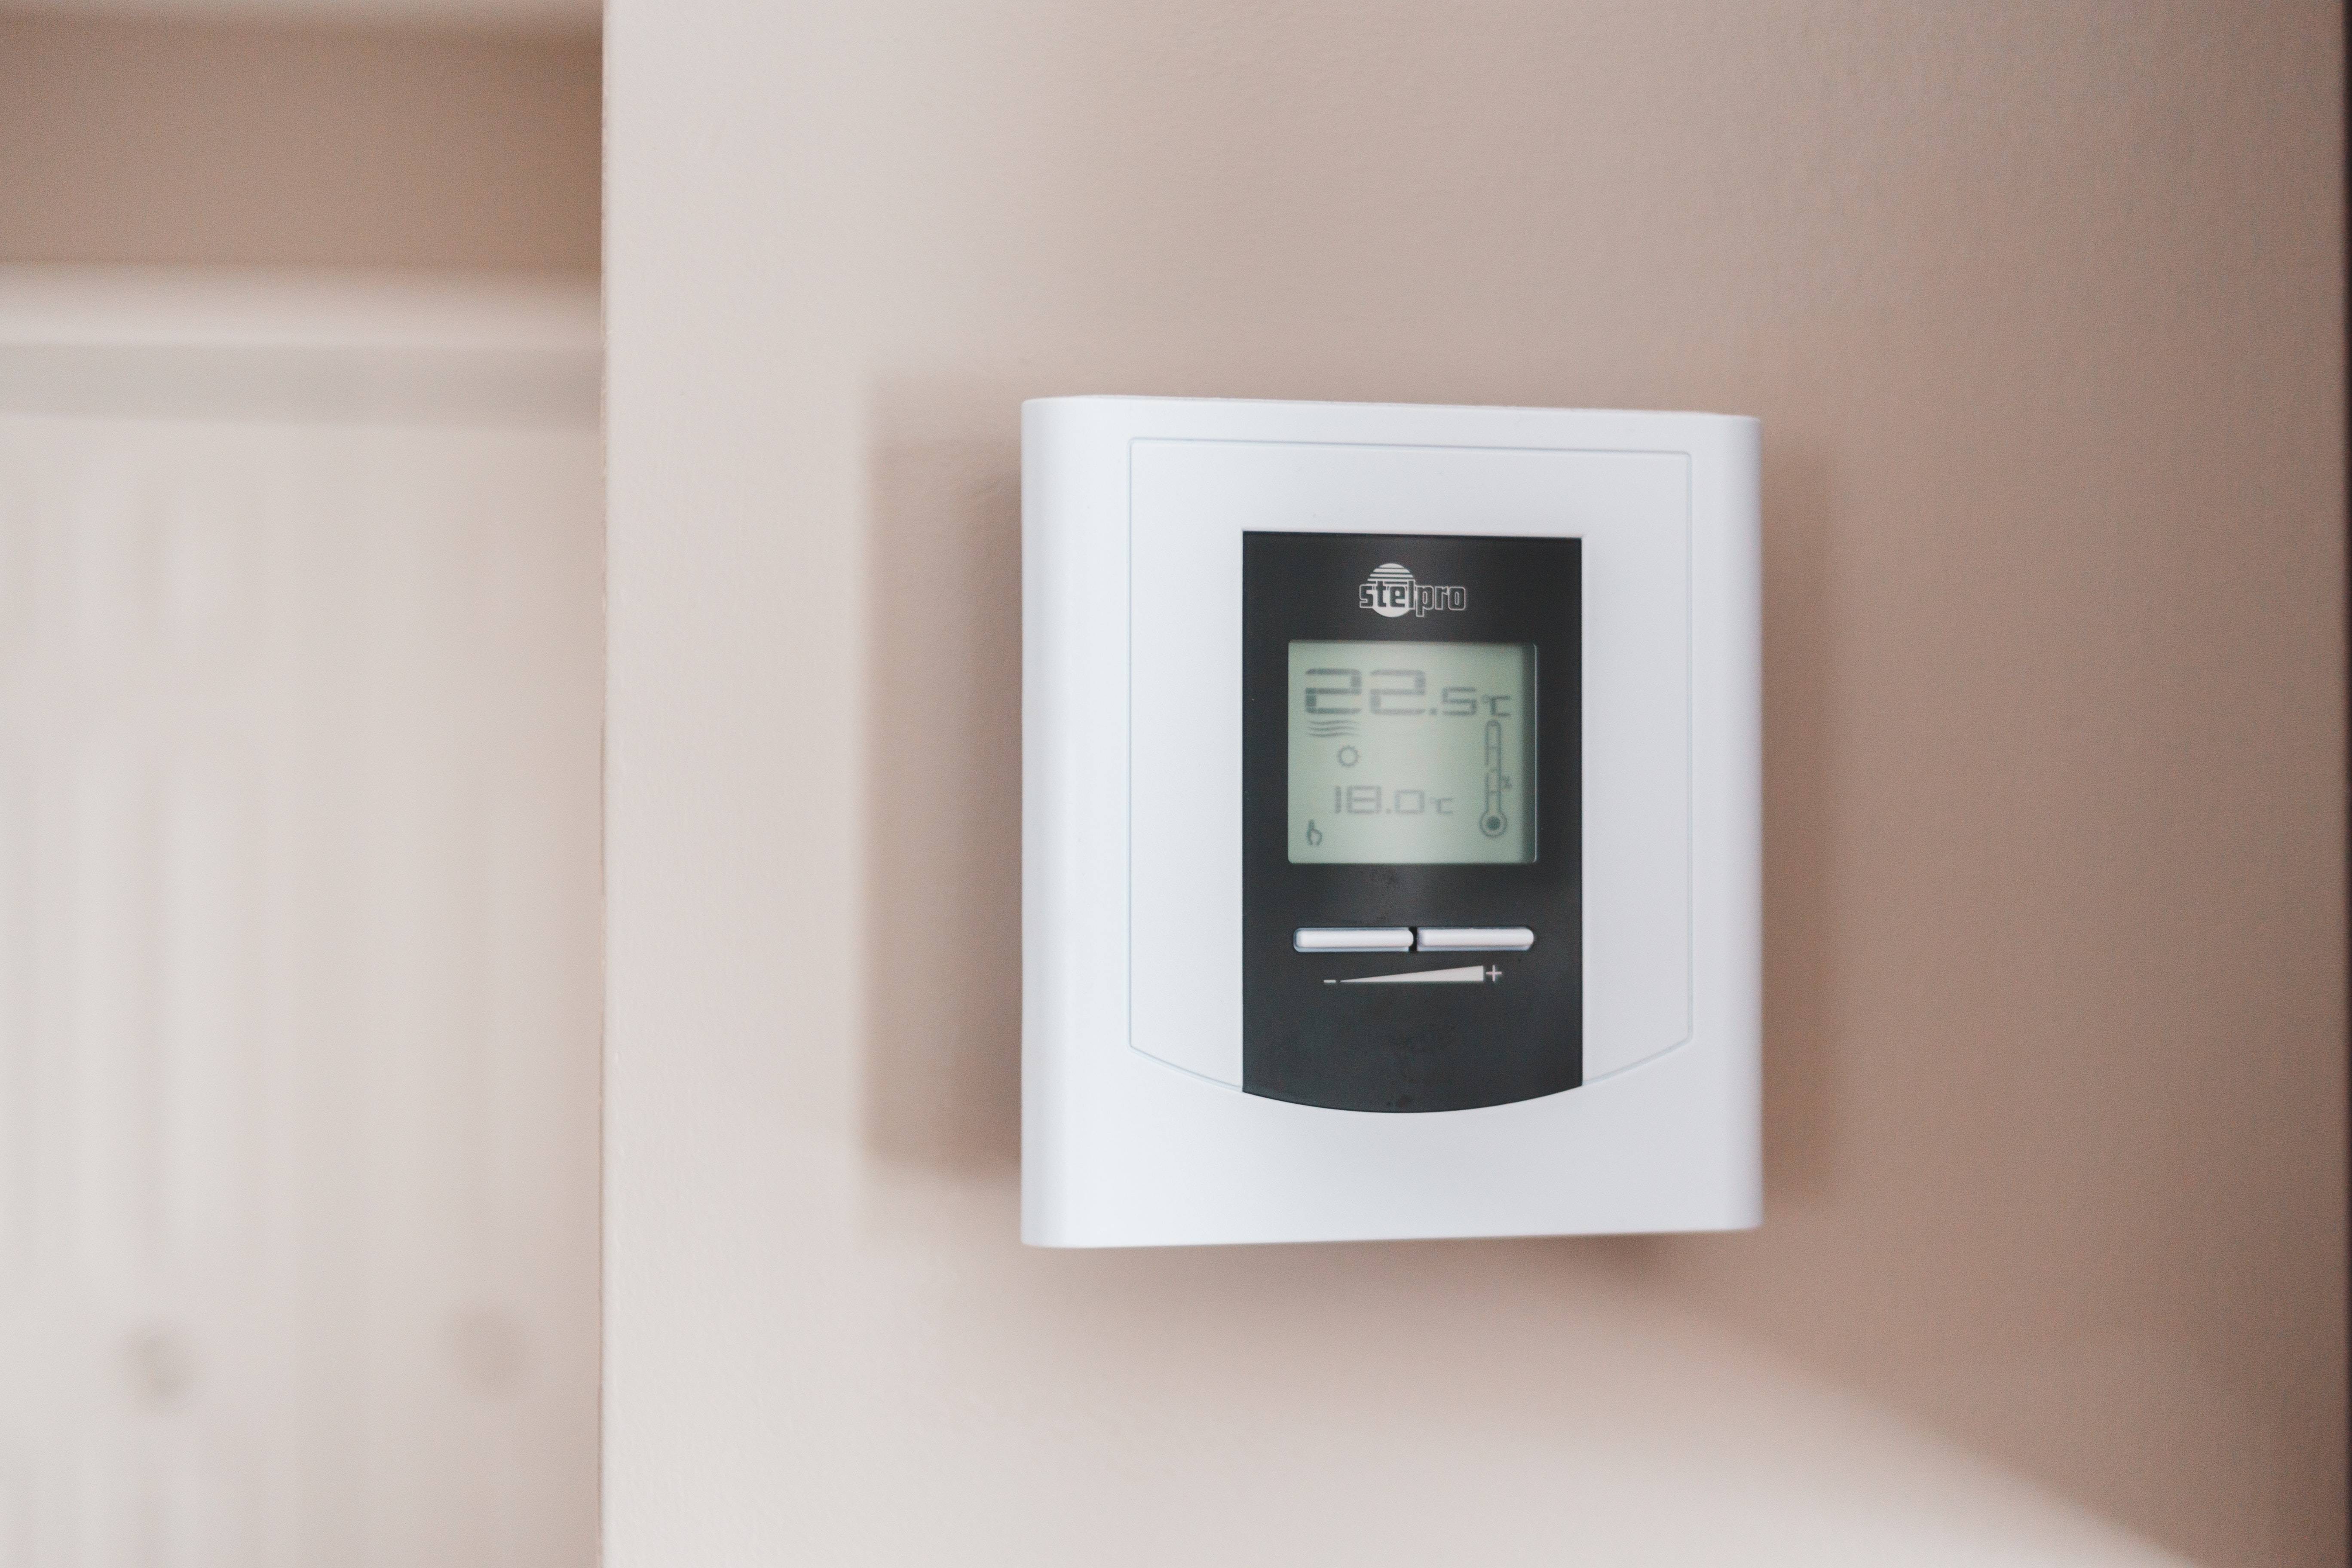 Home thermostat on the wall